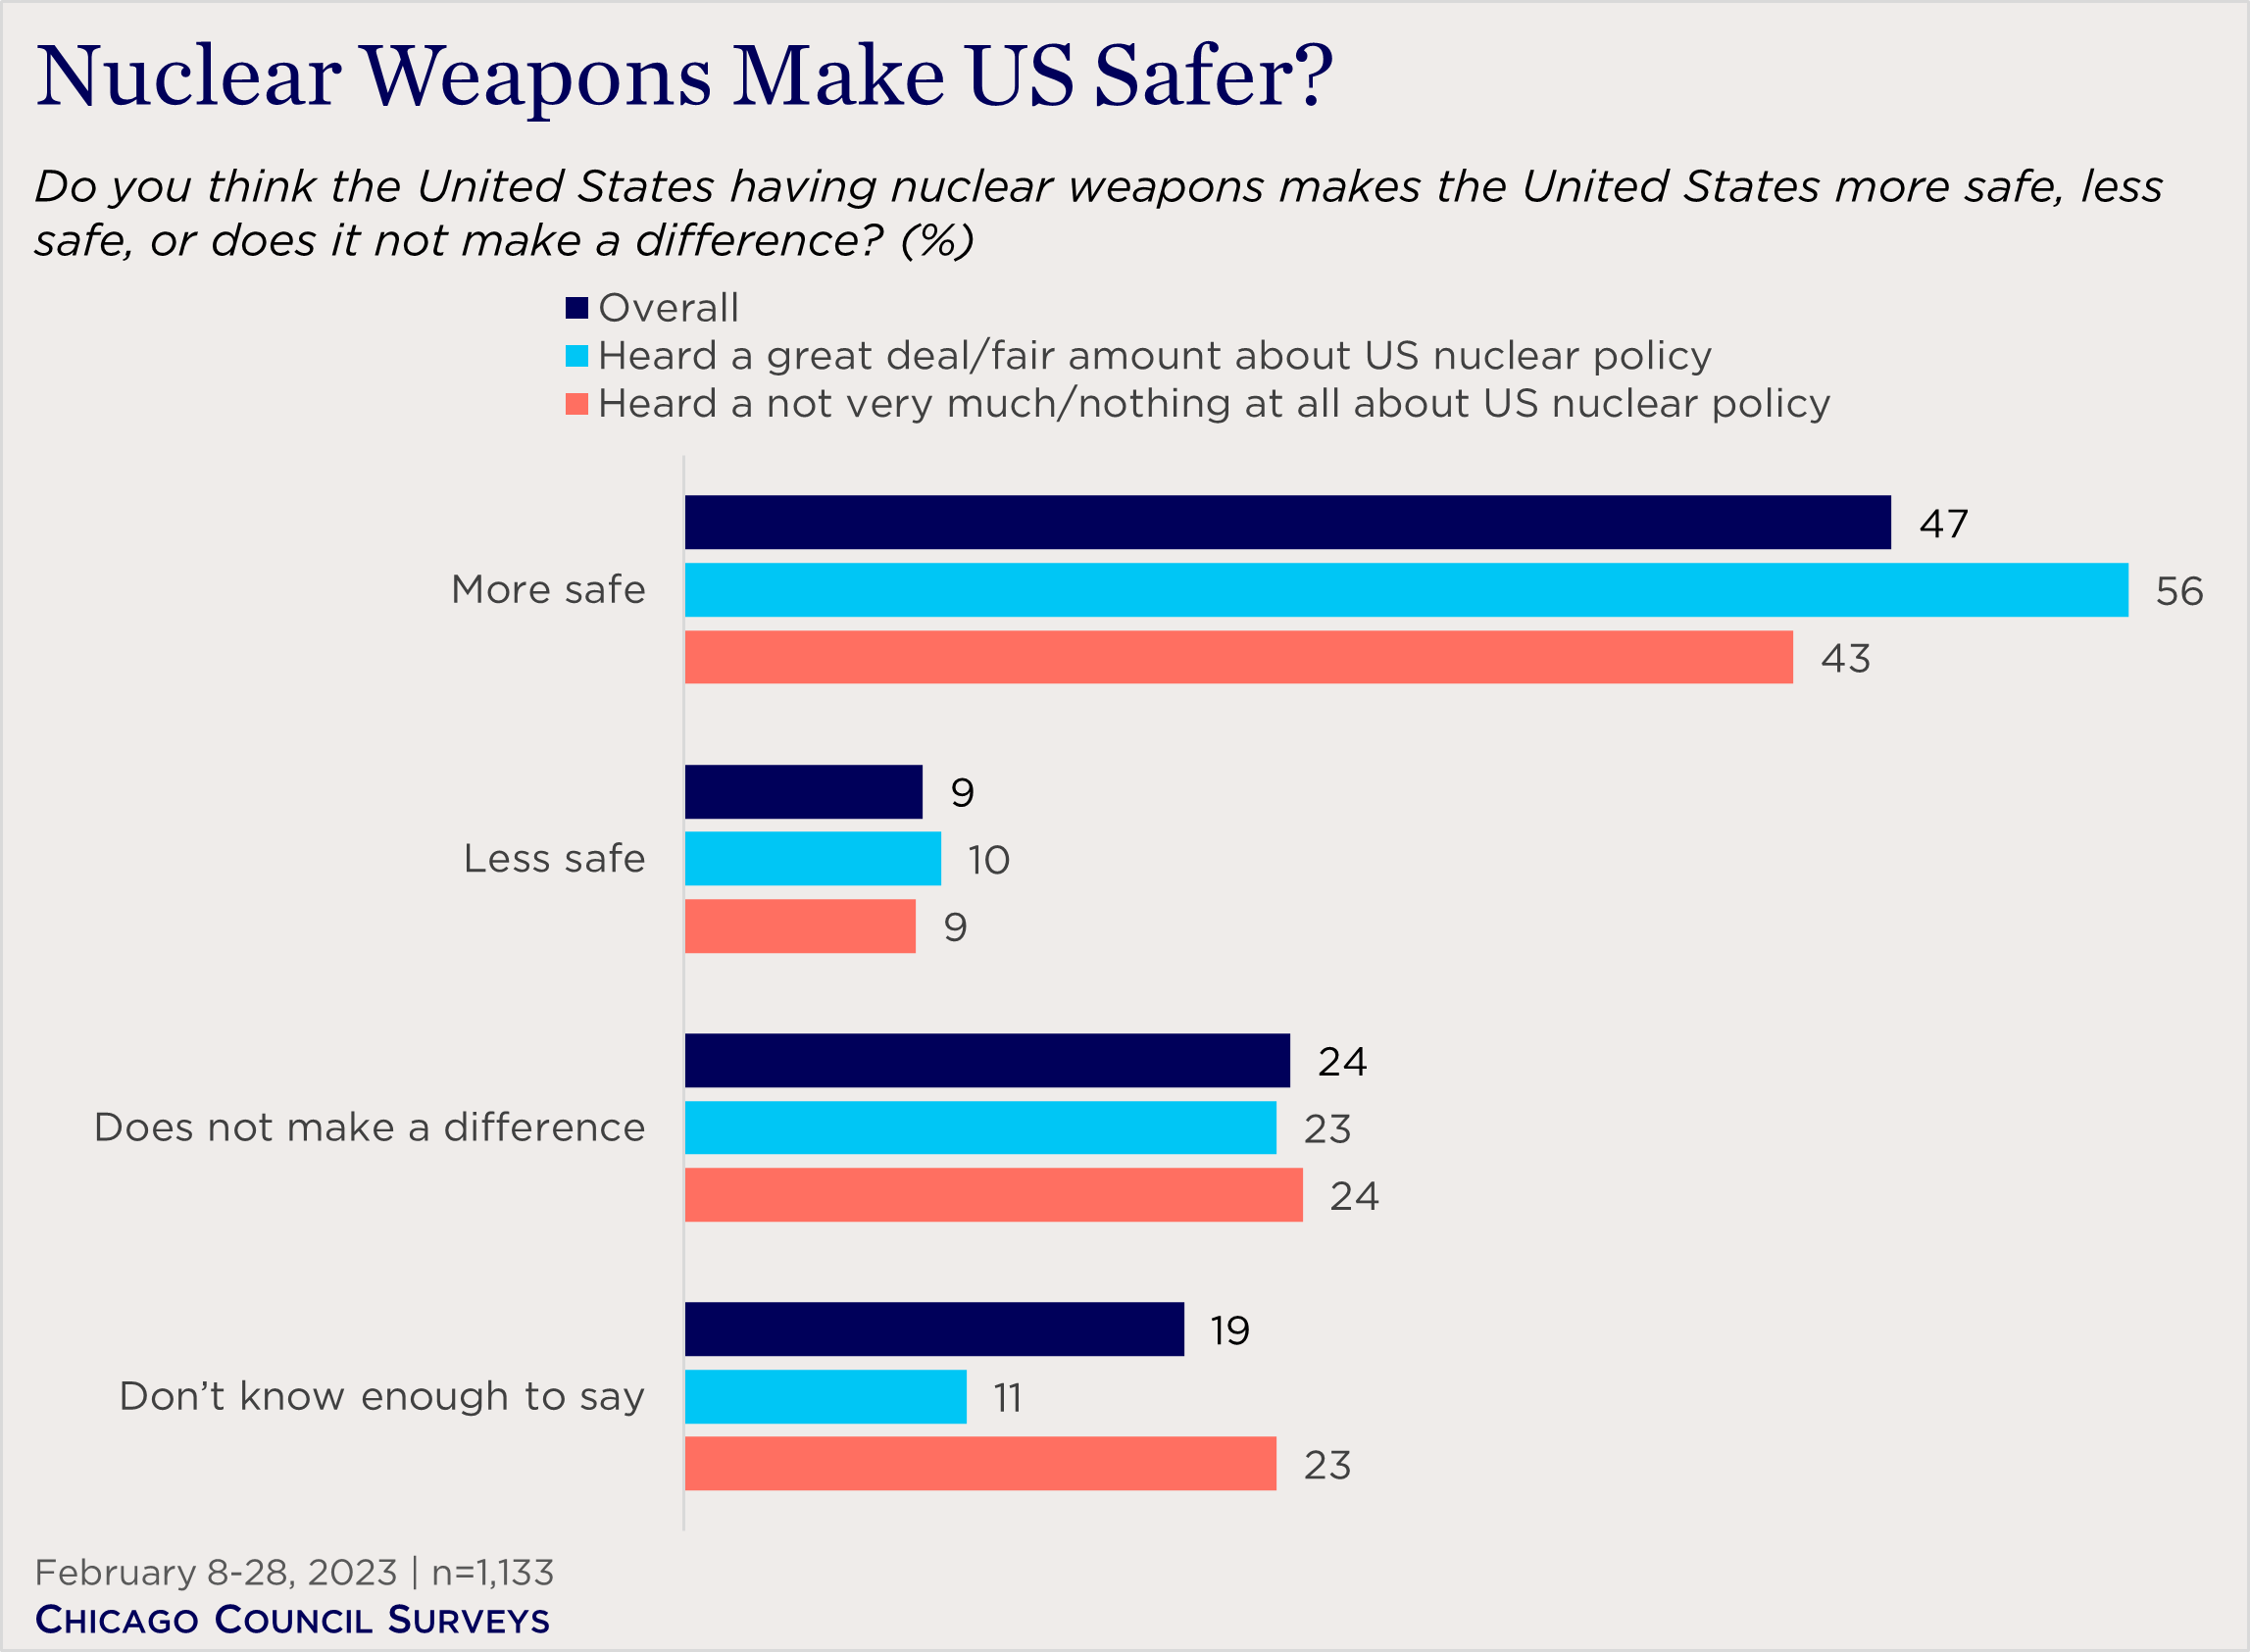 bar chart showing views on whether nuclear weapons make US safer by familiarity